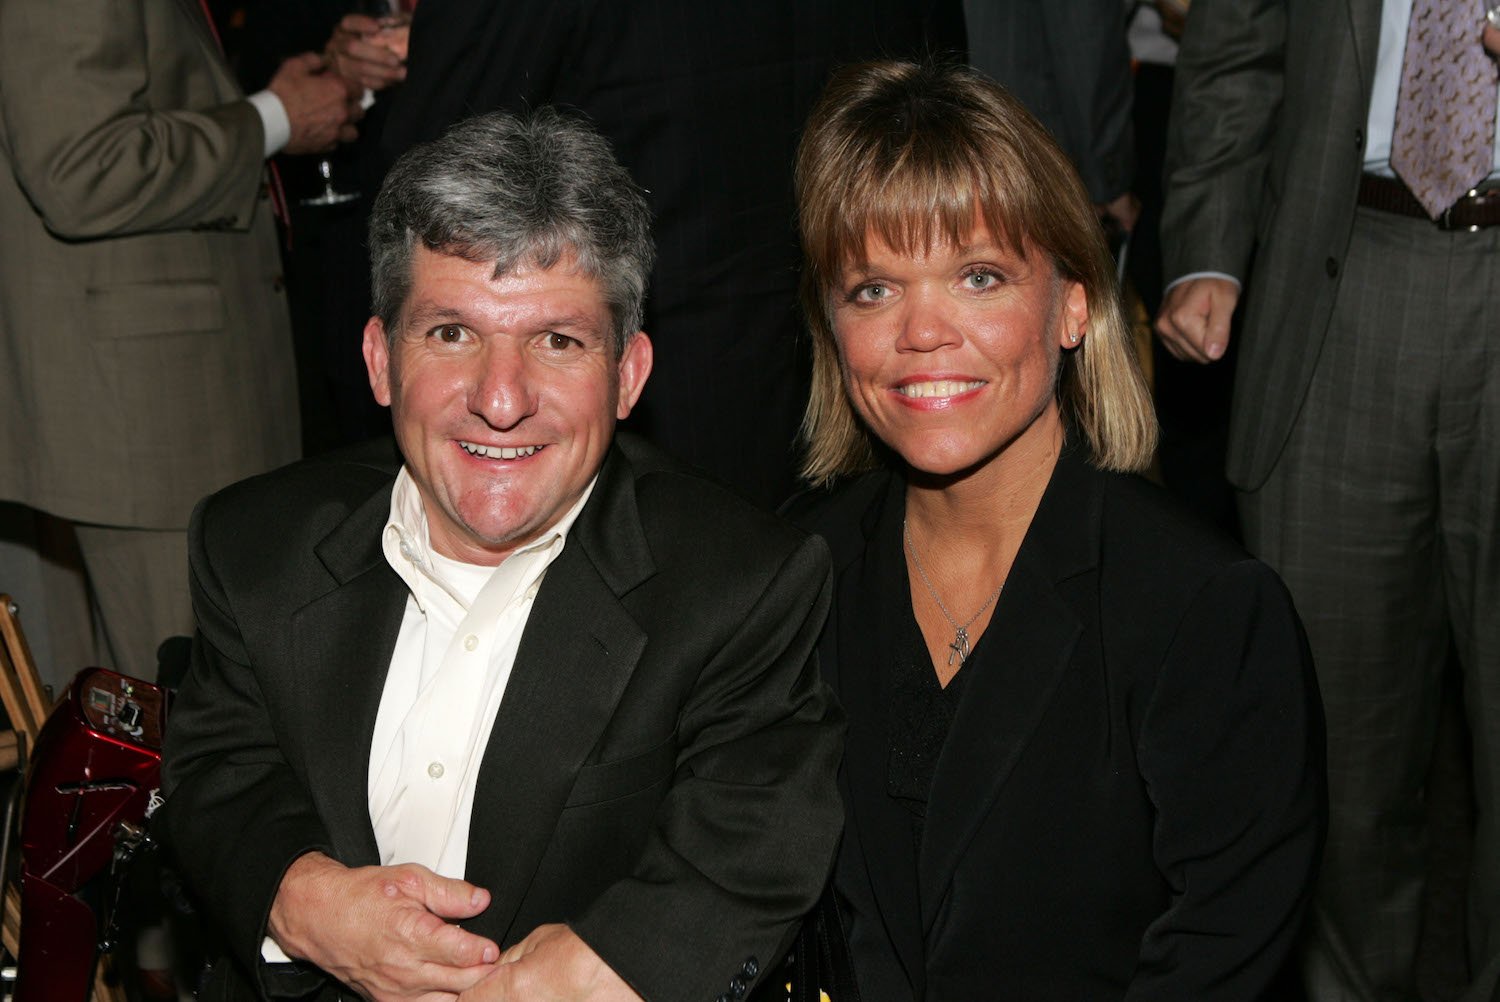 Matt Roloff and Amy Roloff, the parents of Zach, Jeremy, Molly, and Jacob Roloff, from 'Little People, Big World'